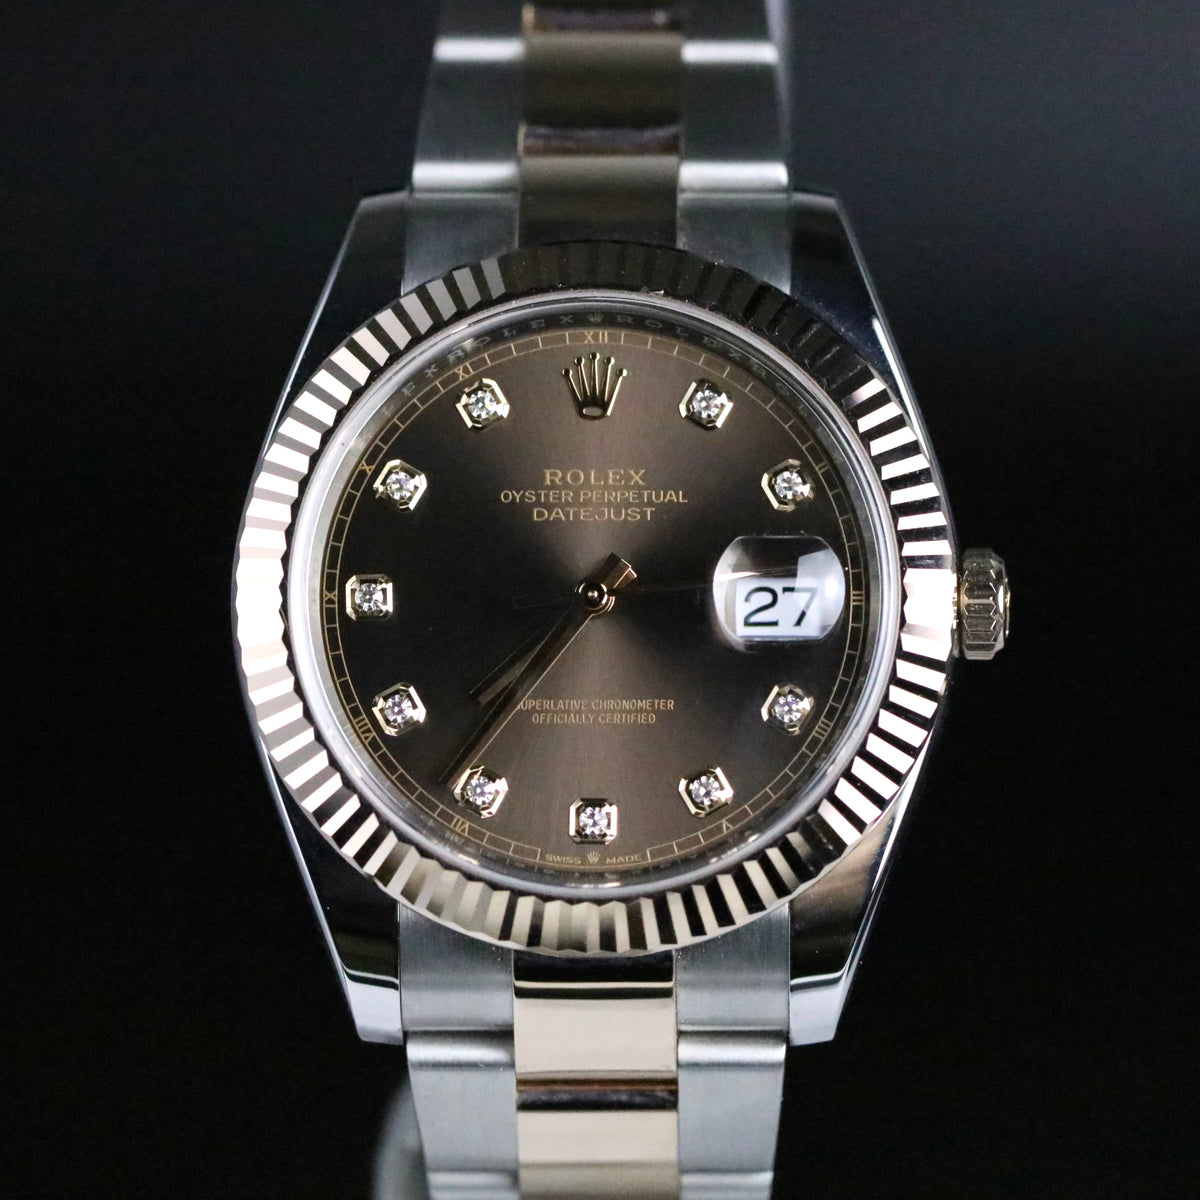 2019 Rolex 126331 Datejust 41mm Chocolate Diamond Dial with Box & Paper